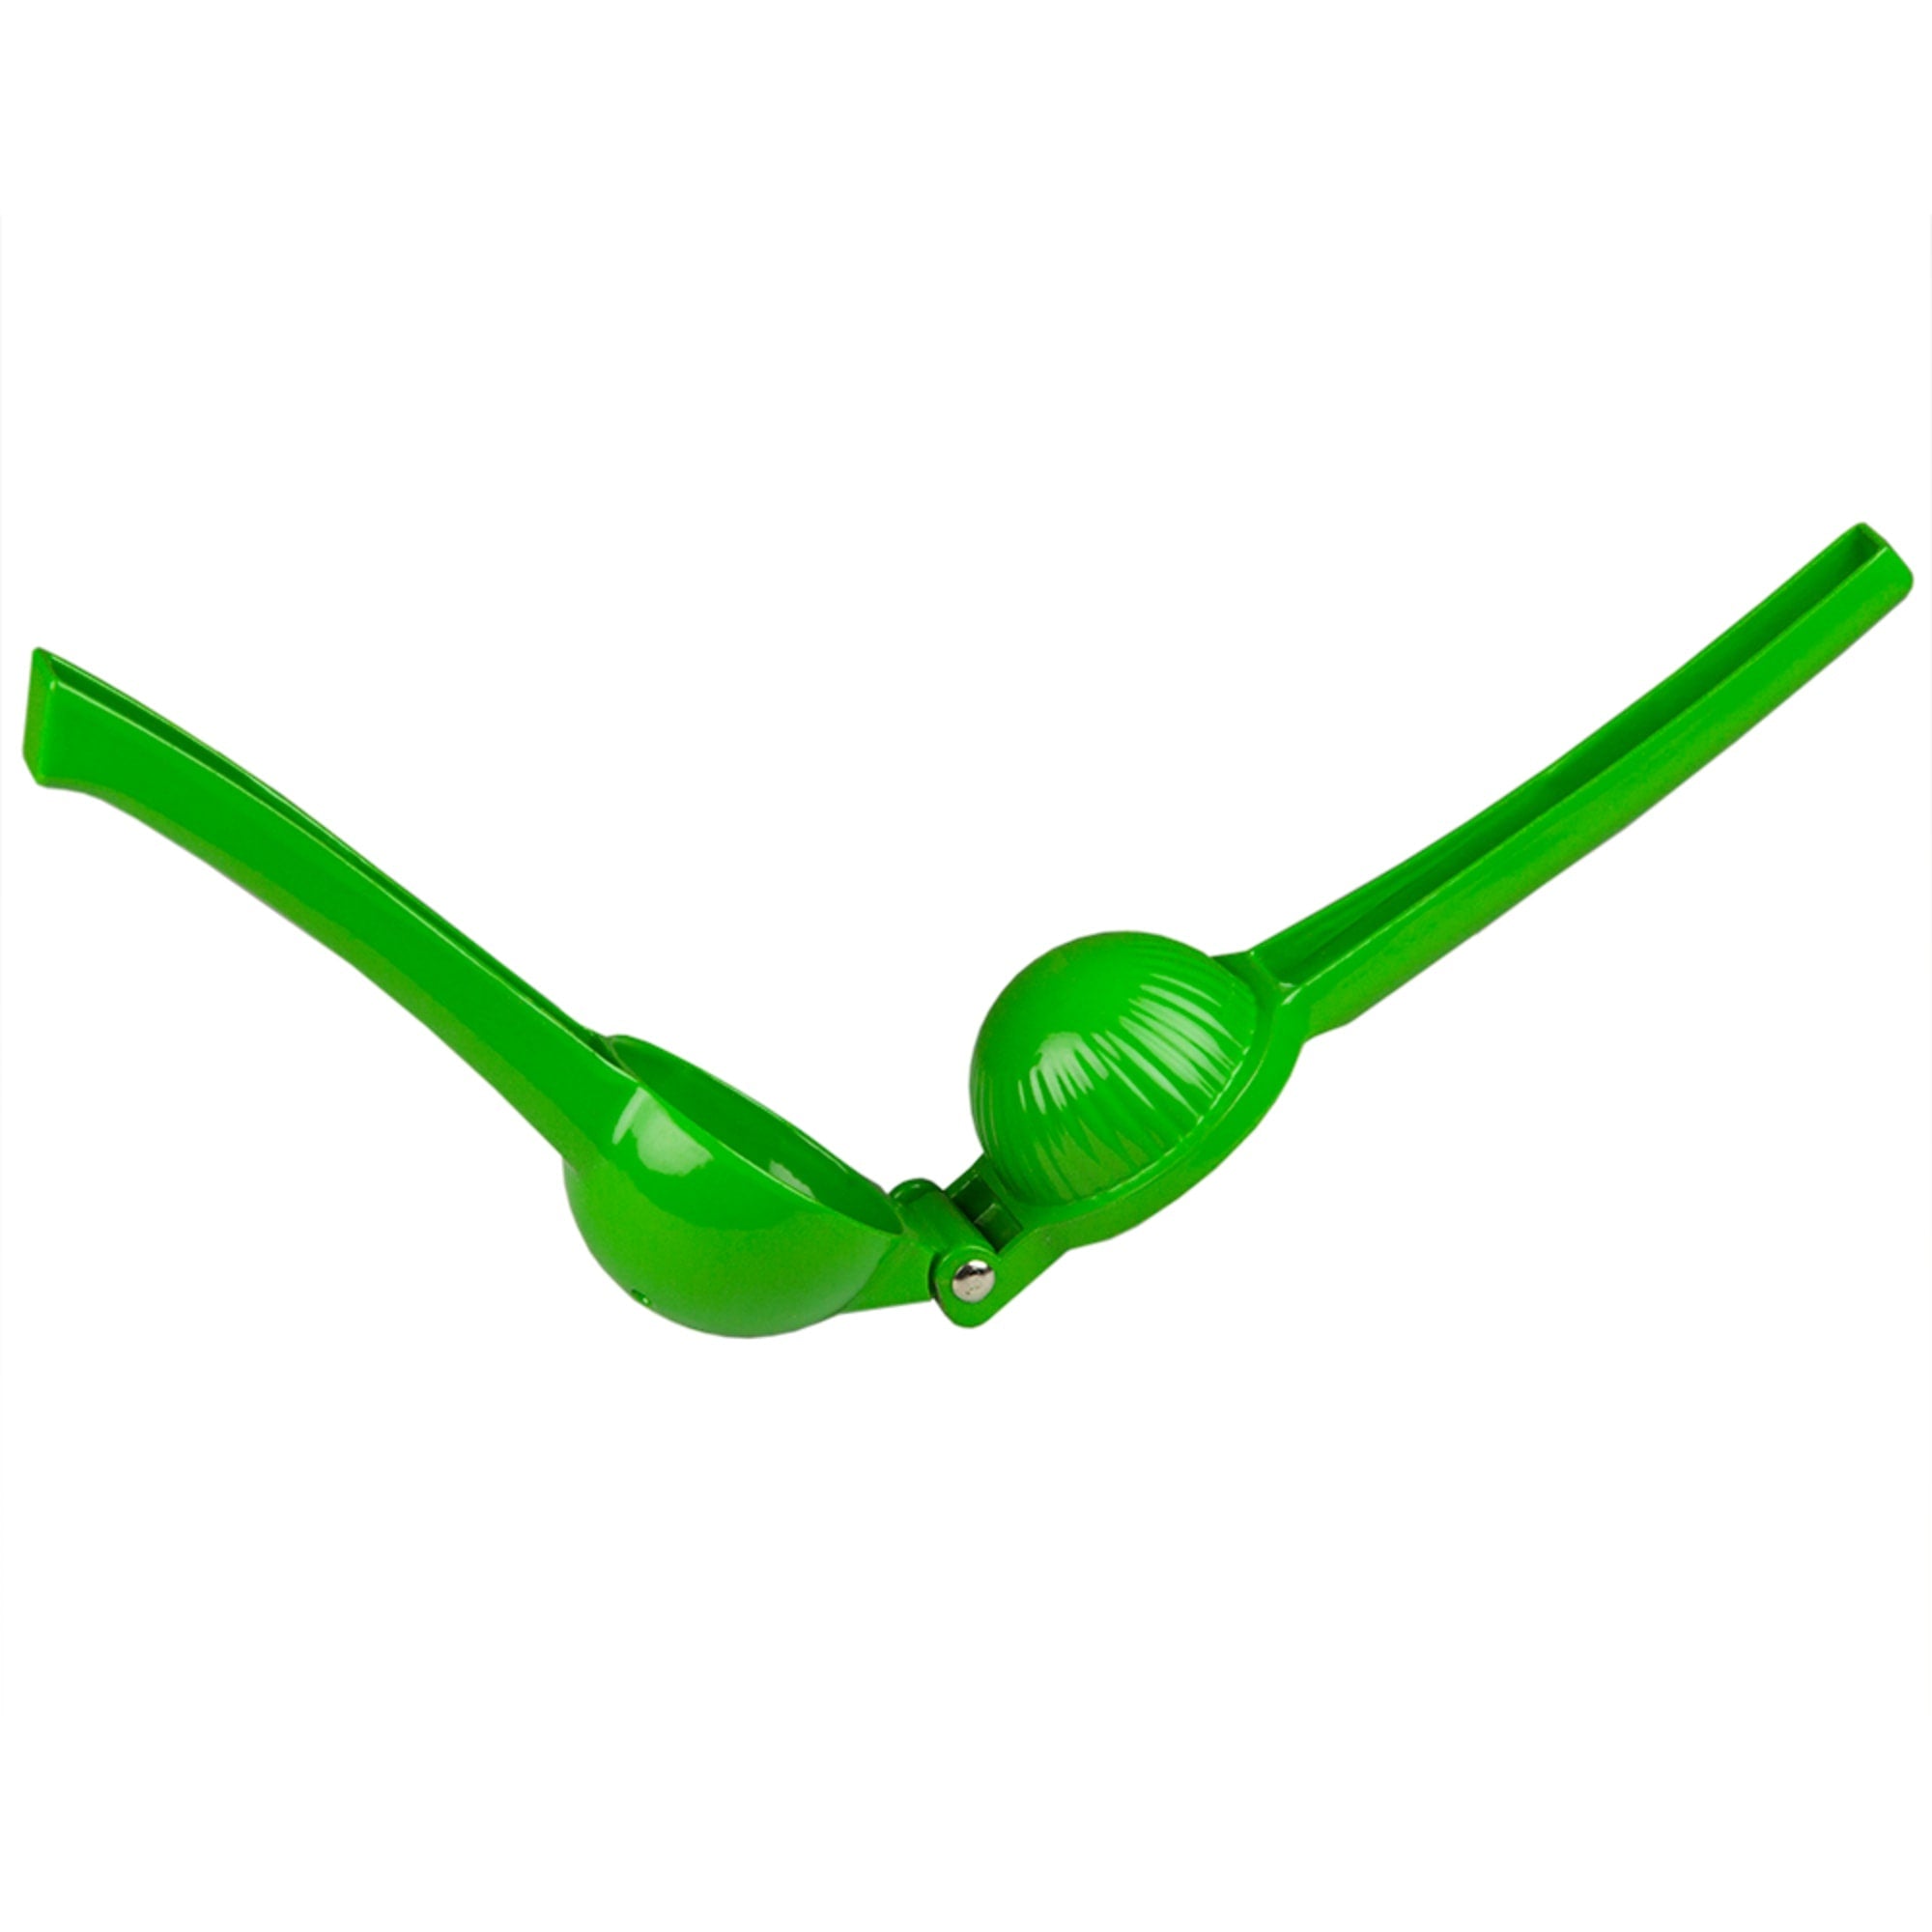 Home Basics Steel Lime Squeezer $3.00 EACH, CASE PACK OF 24